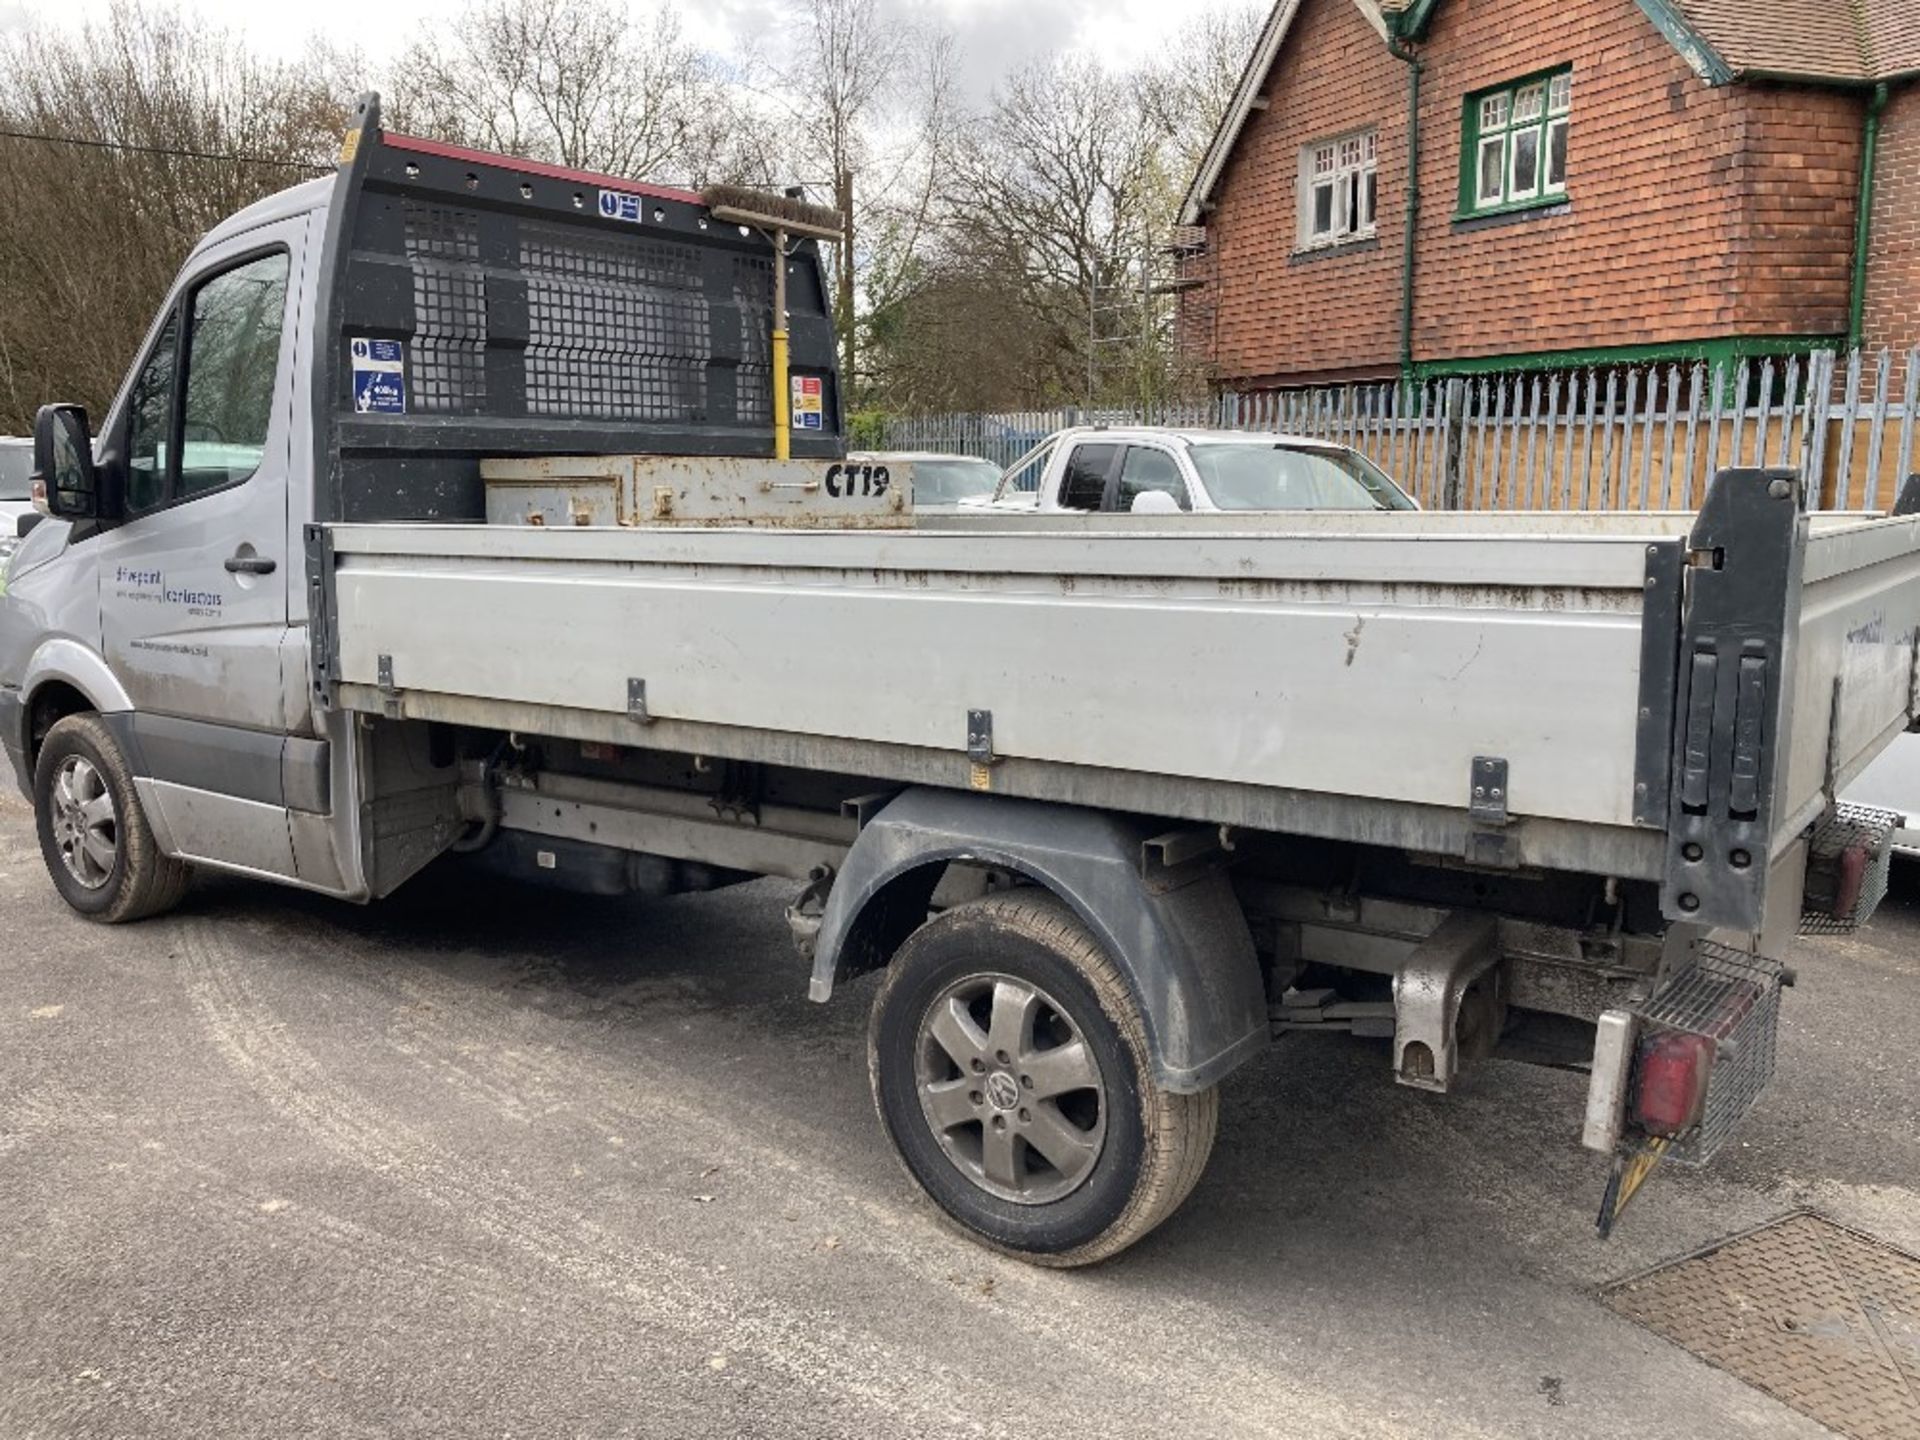 2017 Volkswagen Crafter CR35 TDI Bmt Dropside Tipper - Image 5 of 19